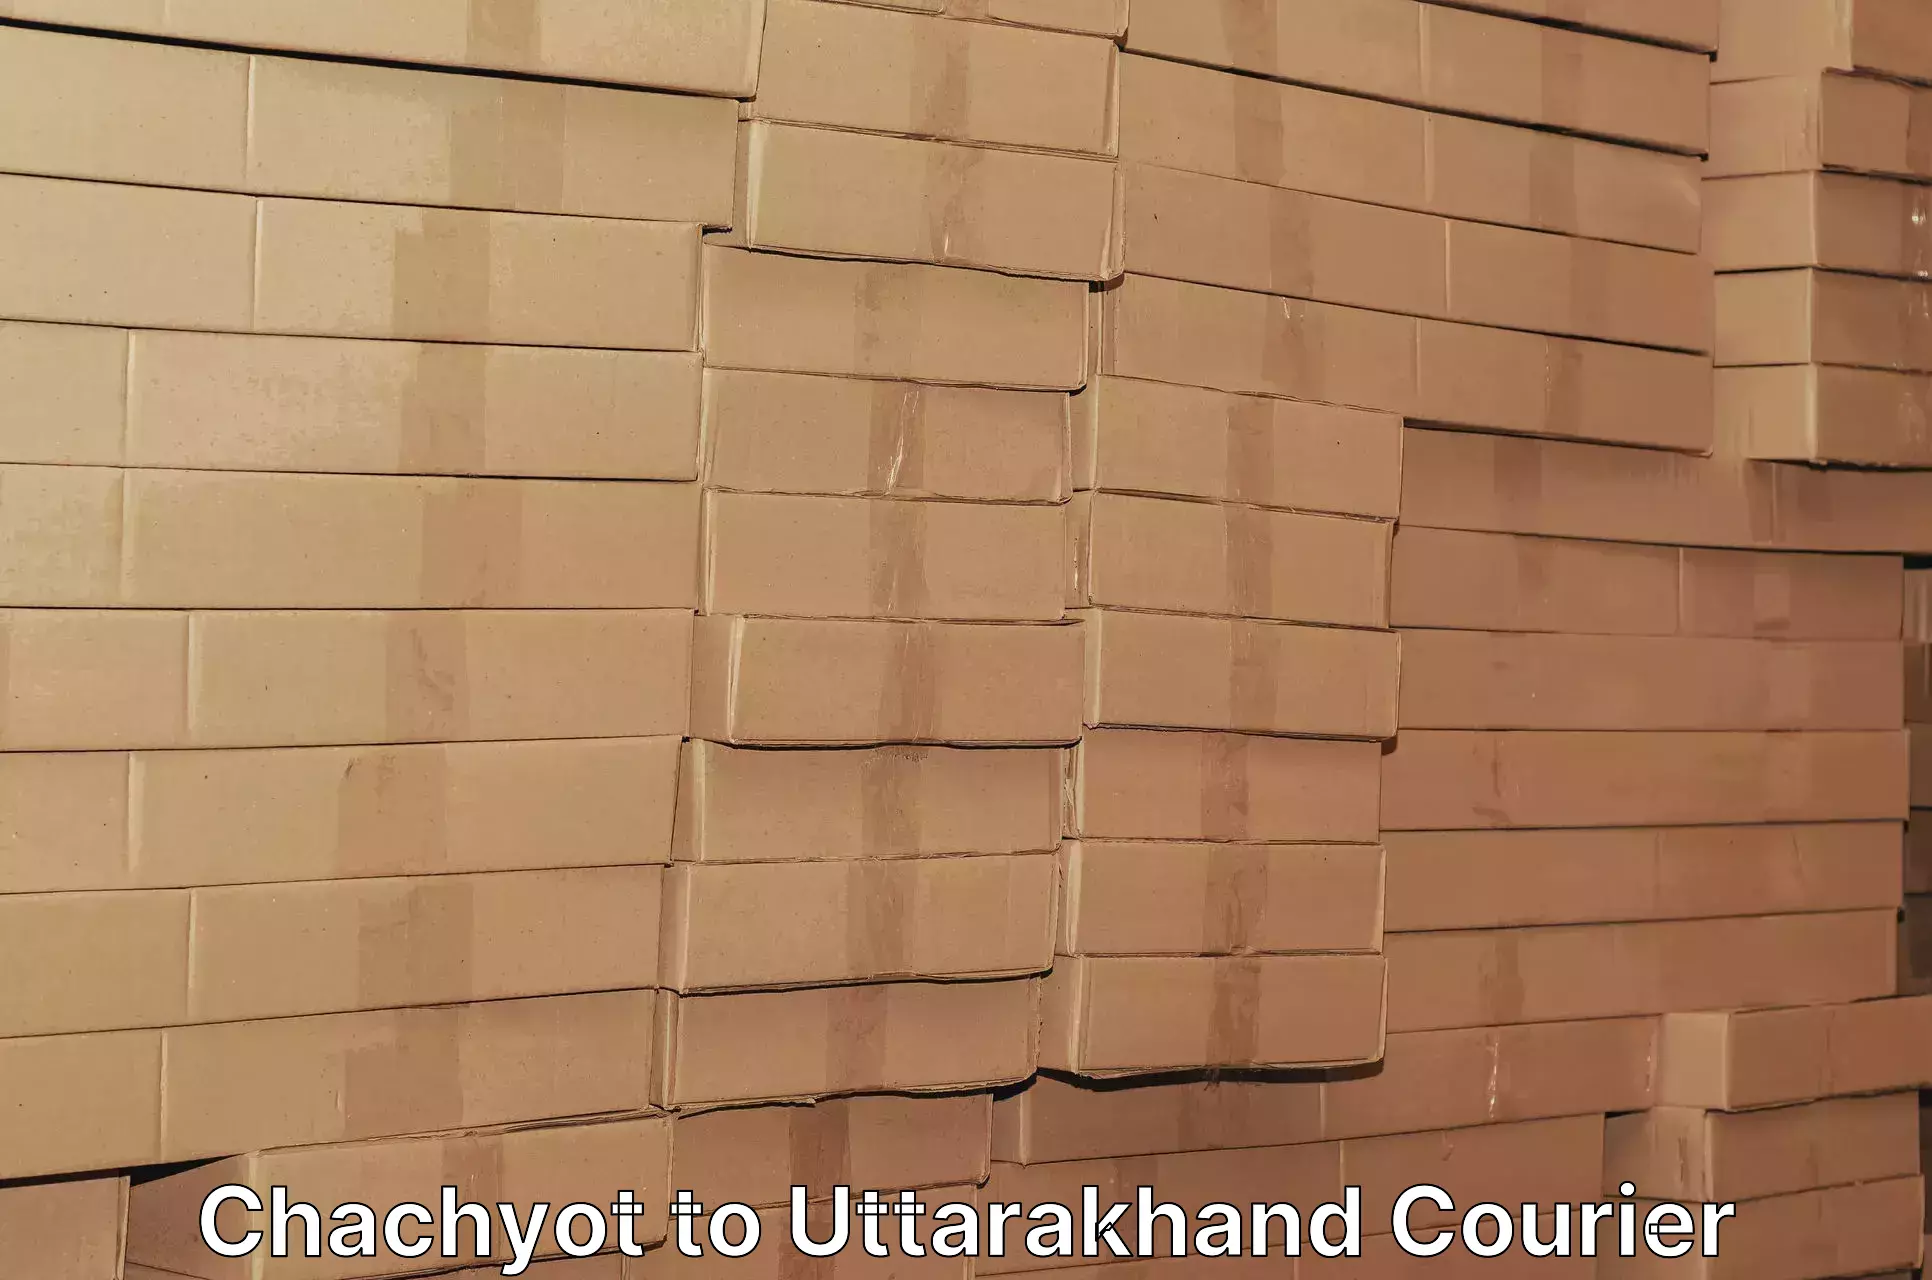 Express shipping in Chachyot to Uttarakhand